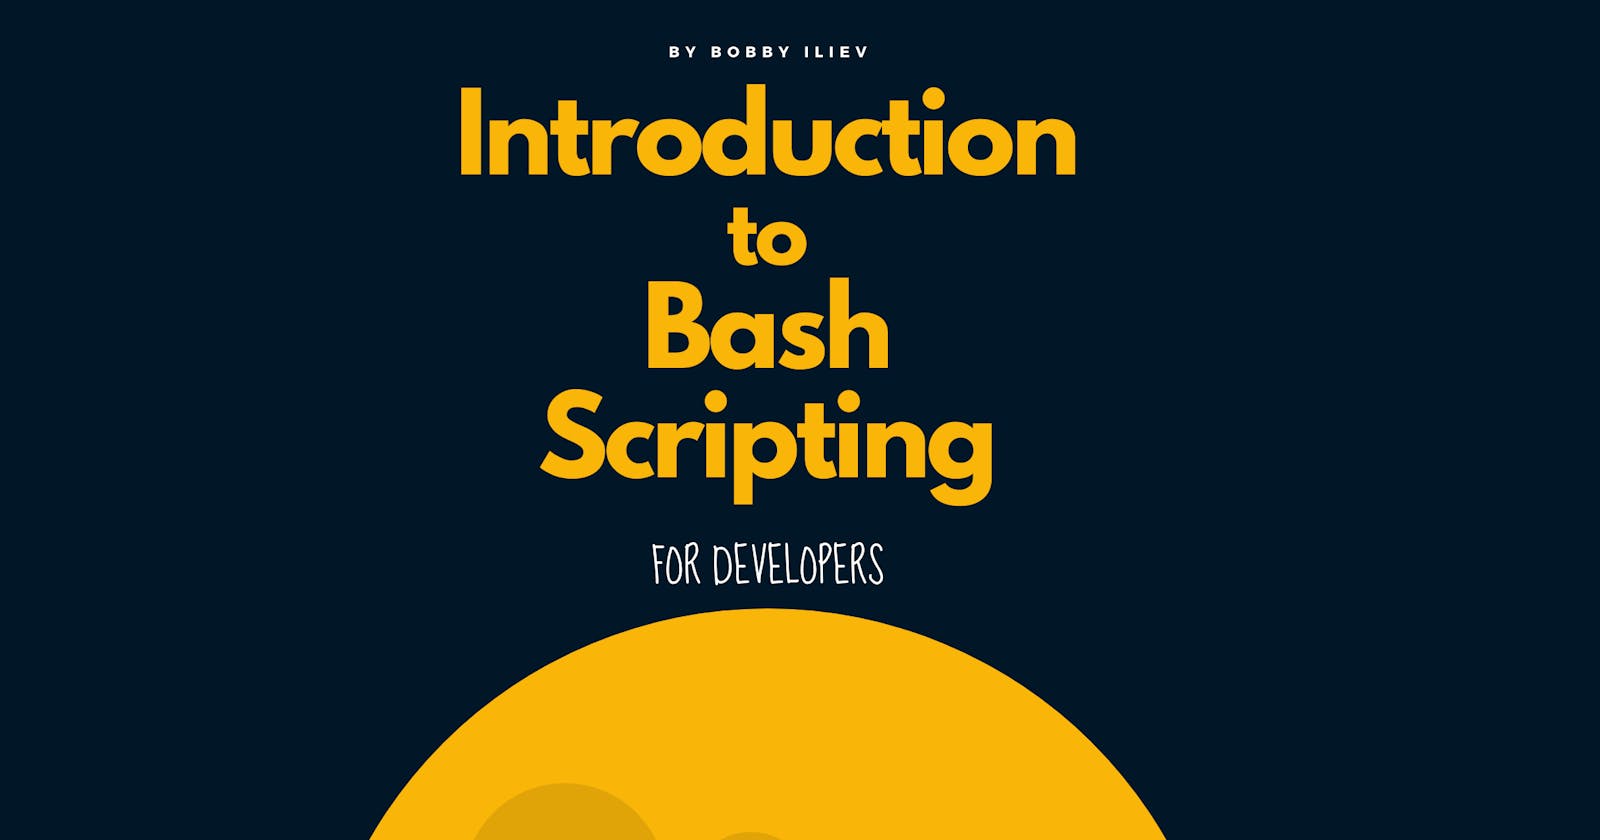 Open-Source Introduction to Bash Scripting Ebook/Guide